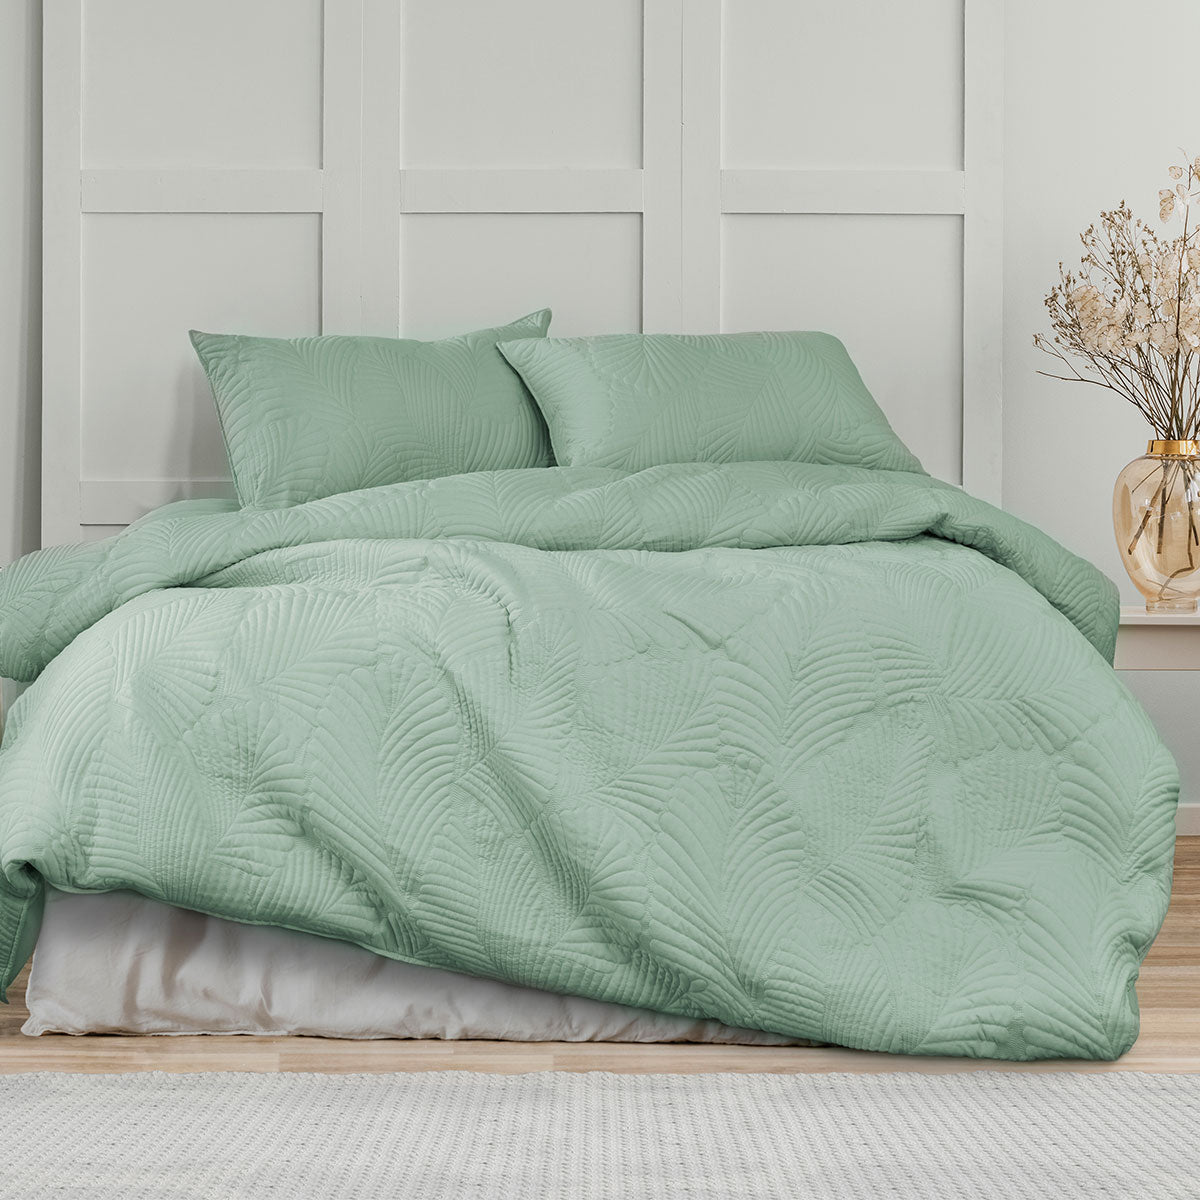 Ardor Molly Palm Green Quilted Queen Quilt Cover Set